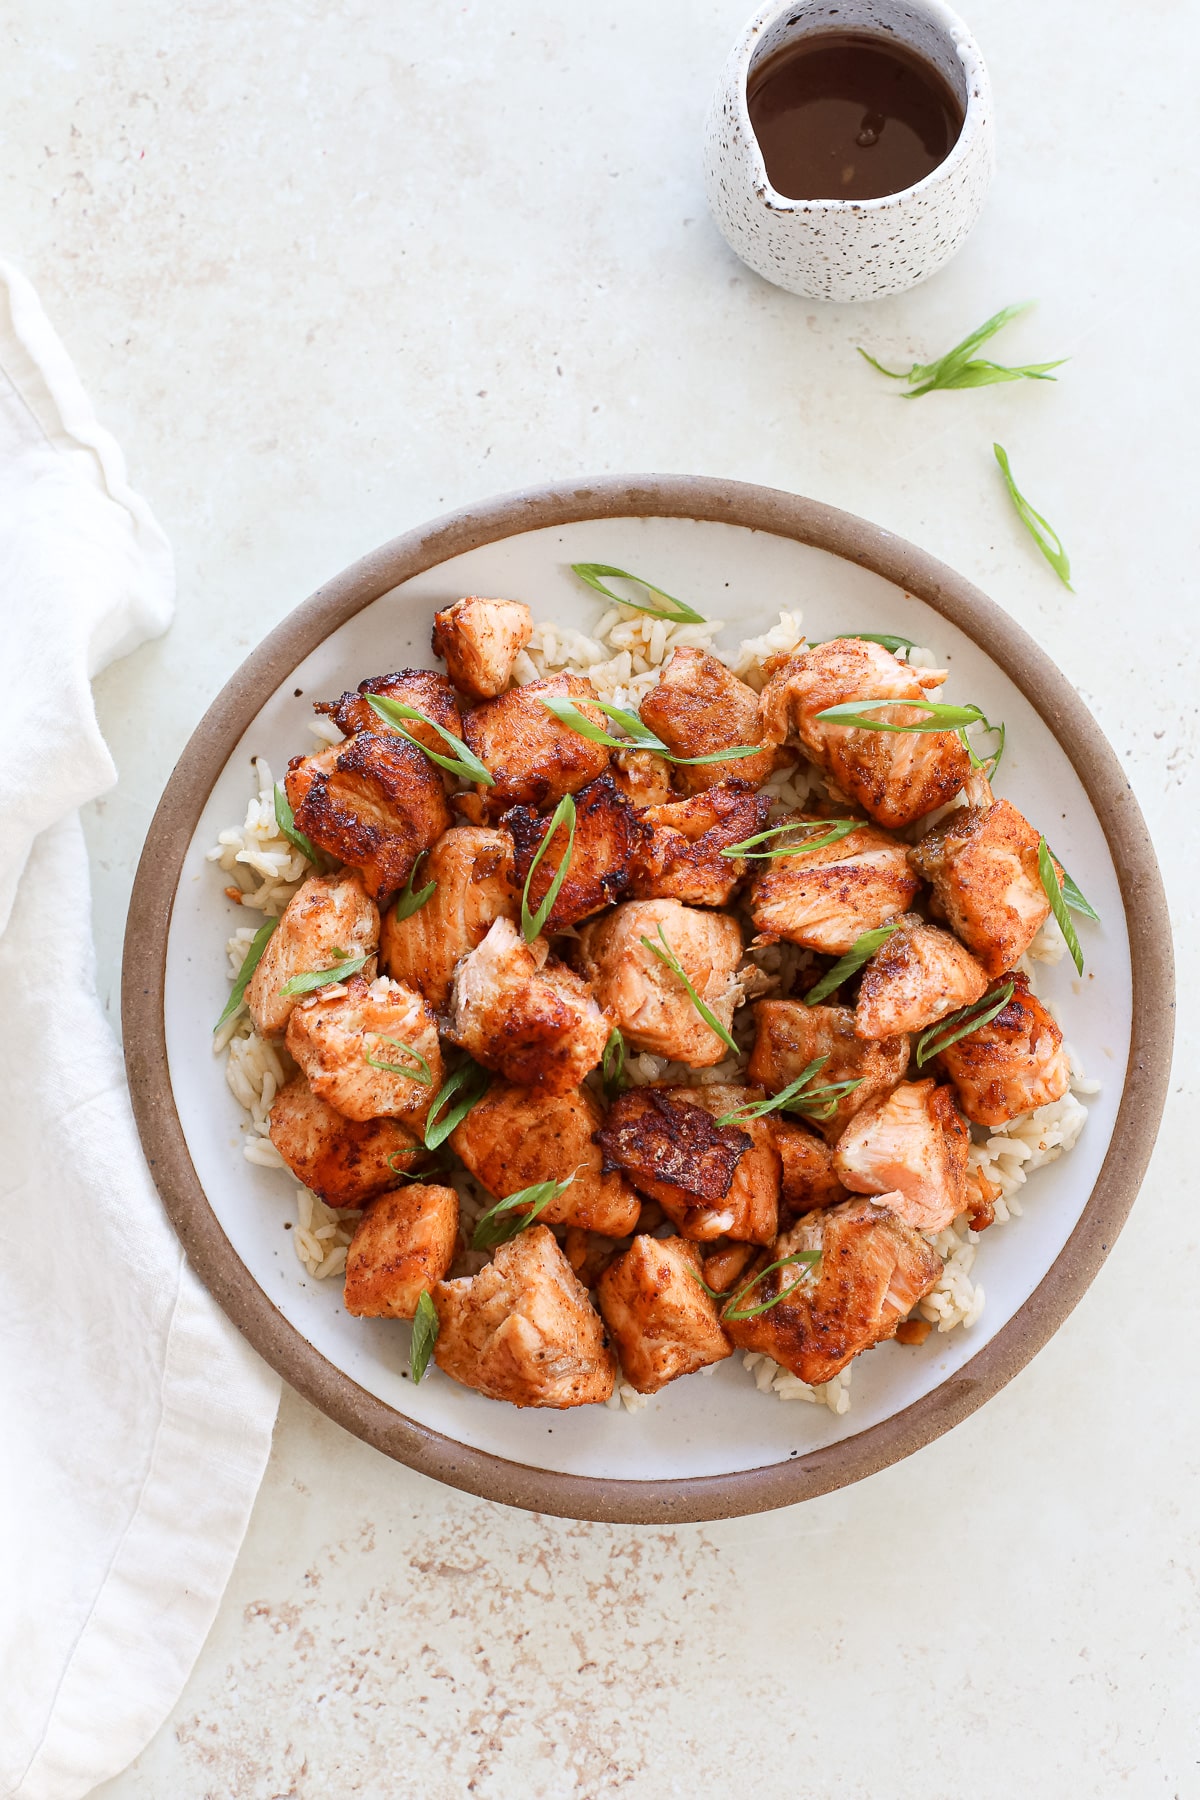 A plate of BBQ salmon bites on a bed of rice and topped with green onions.